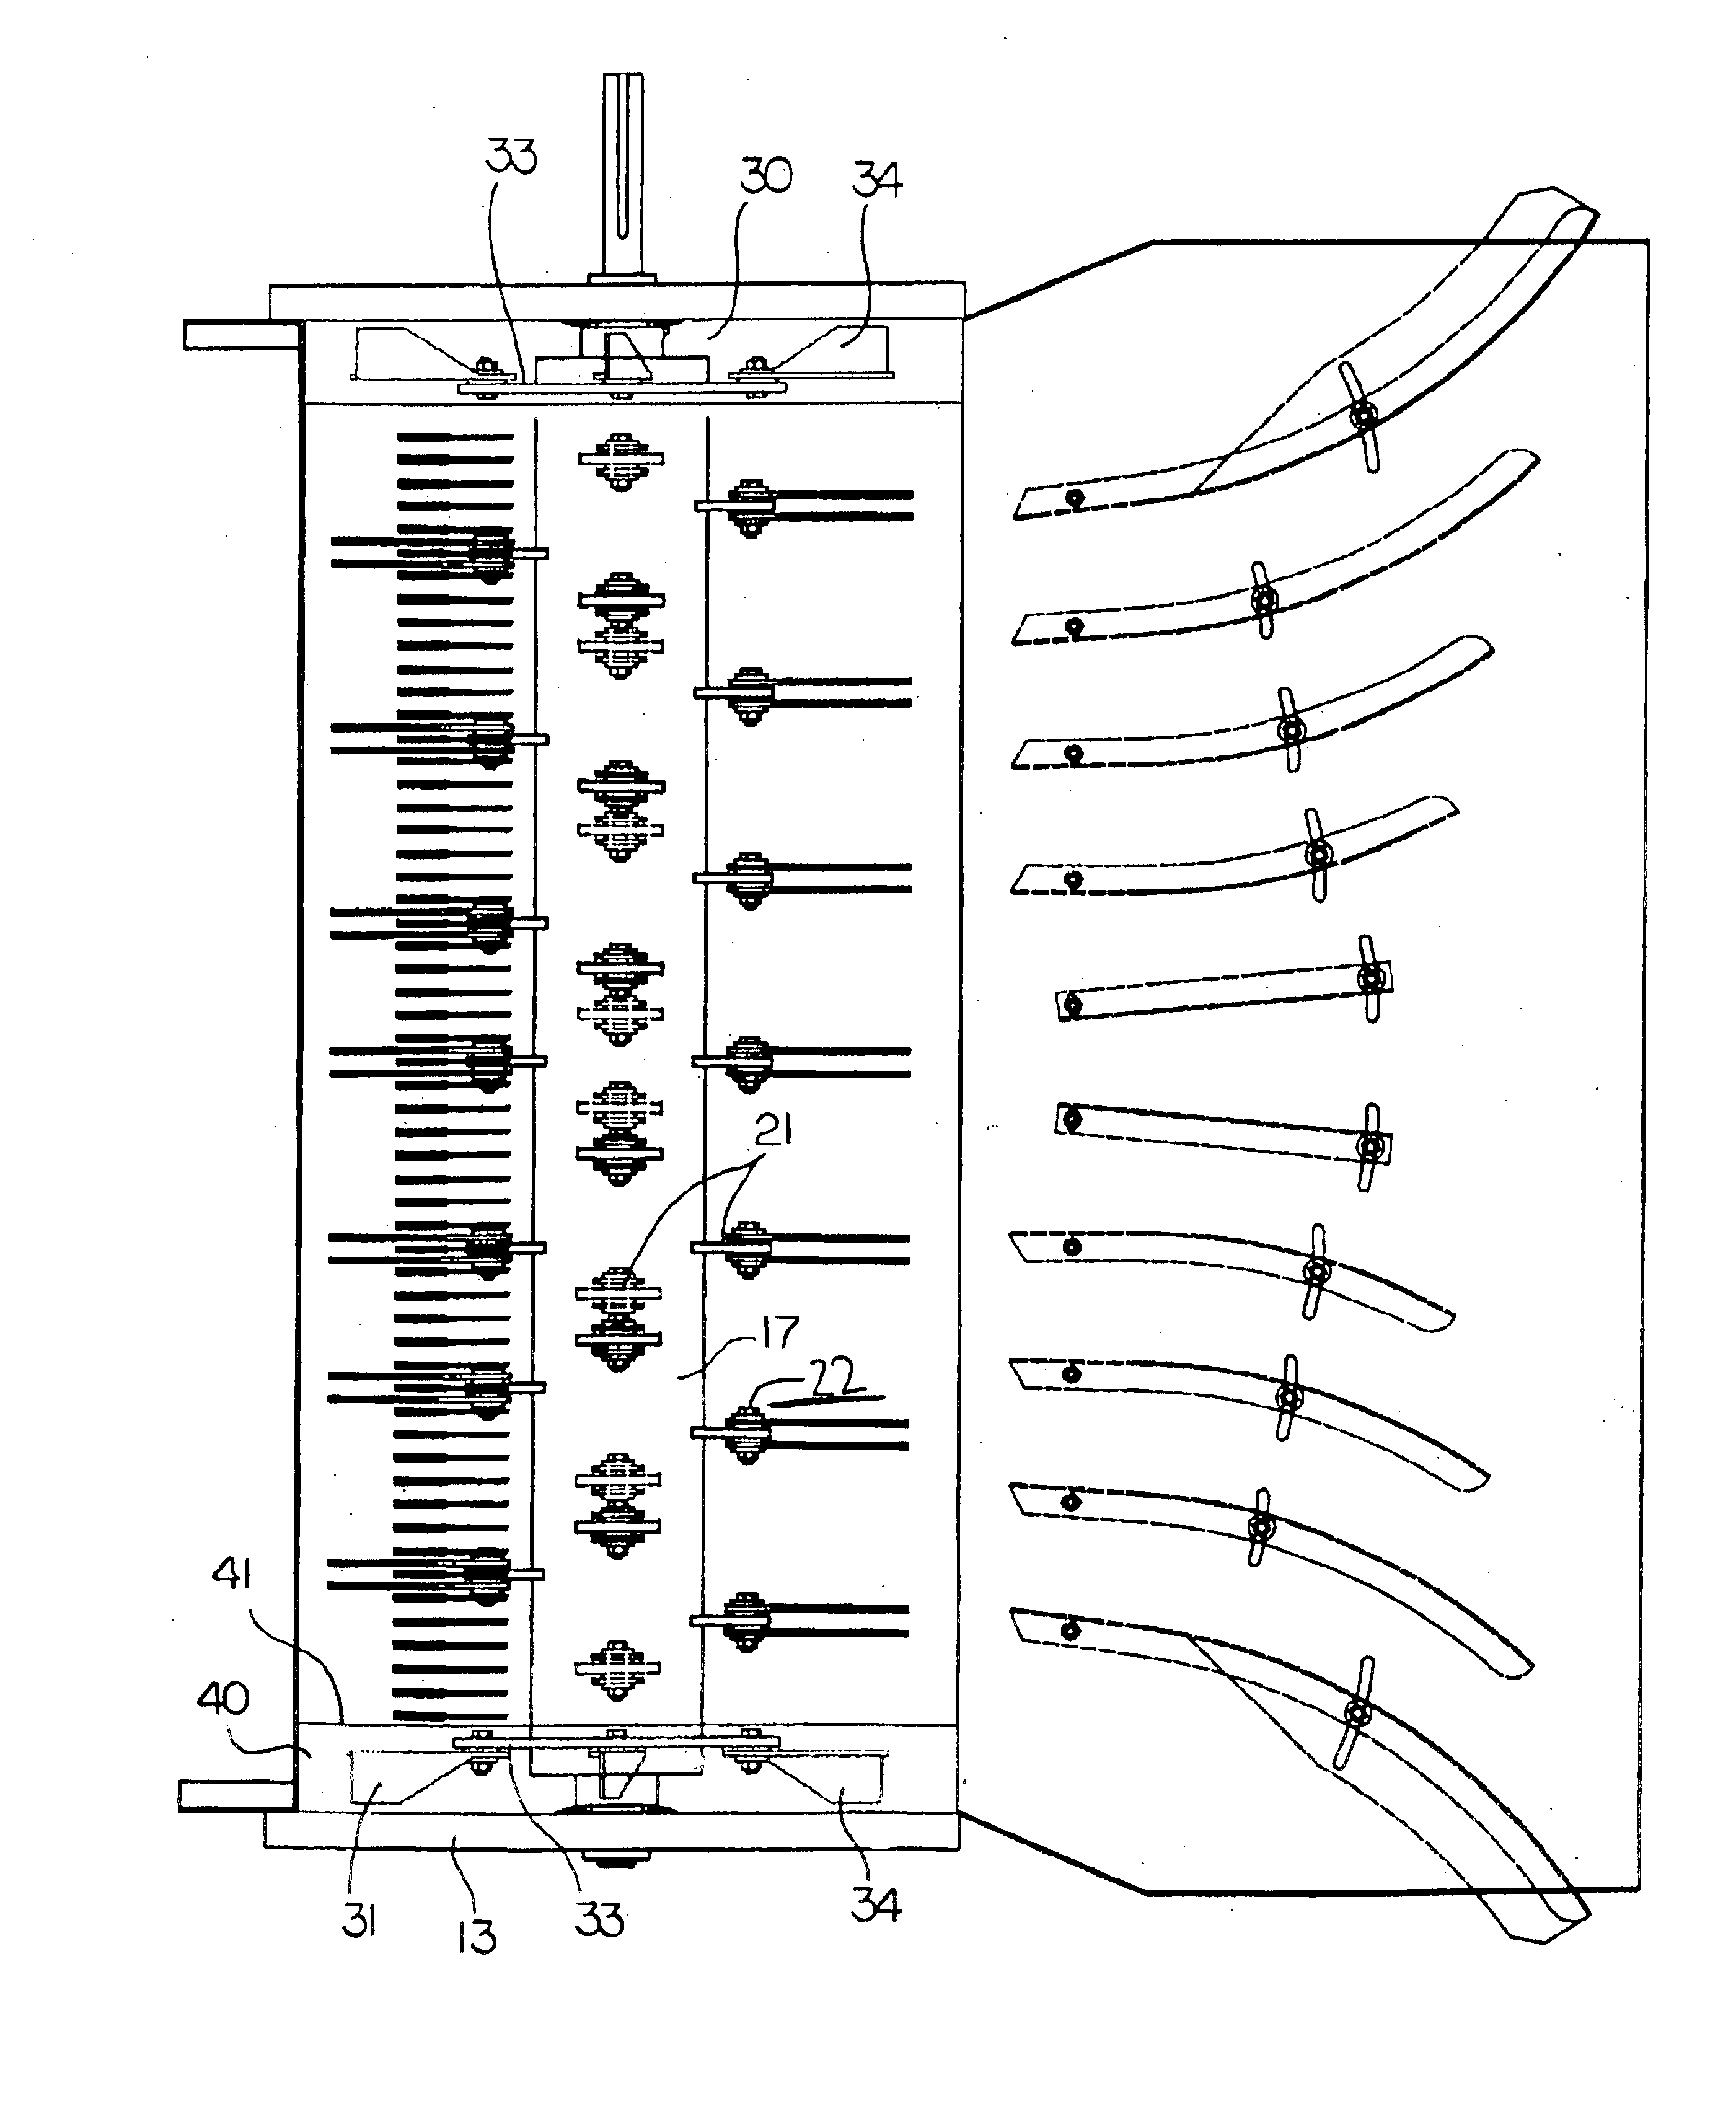 Apparatus for chopping and discharging straw from a combine harvester